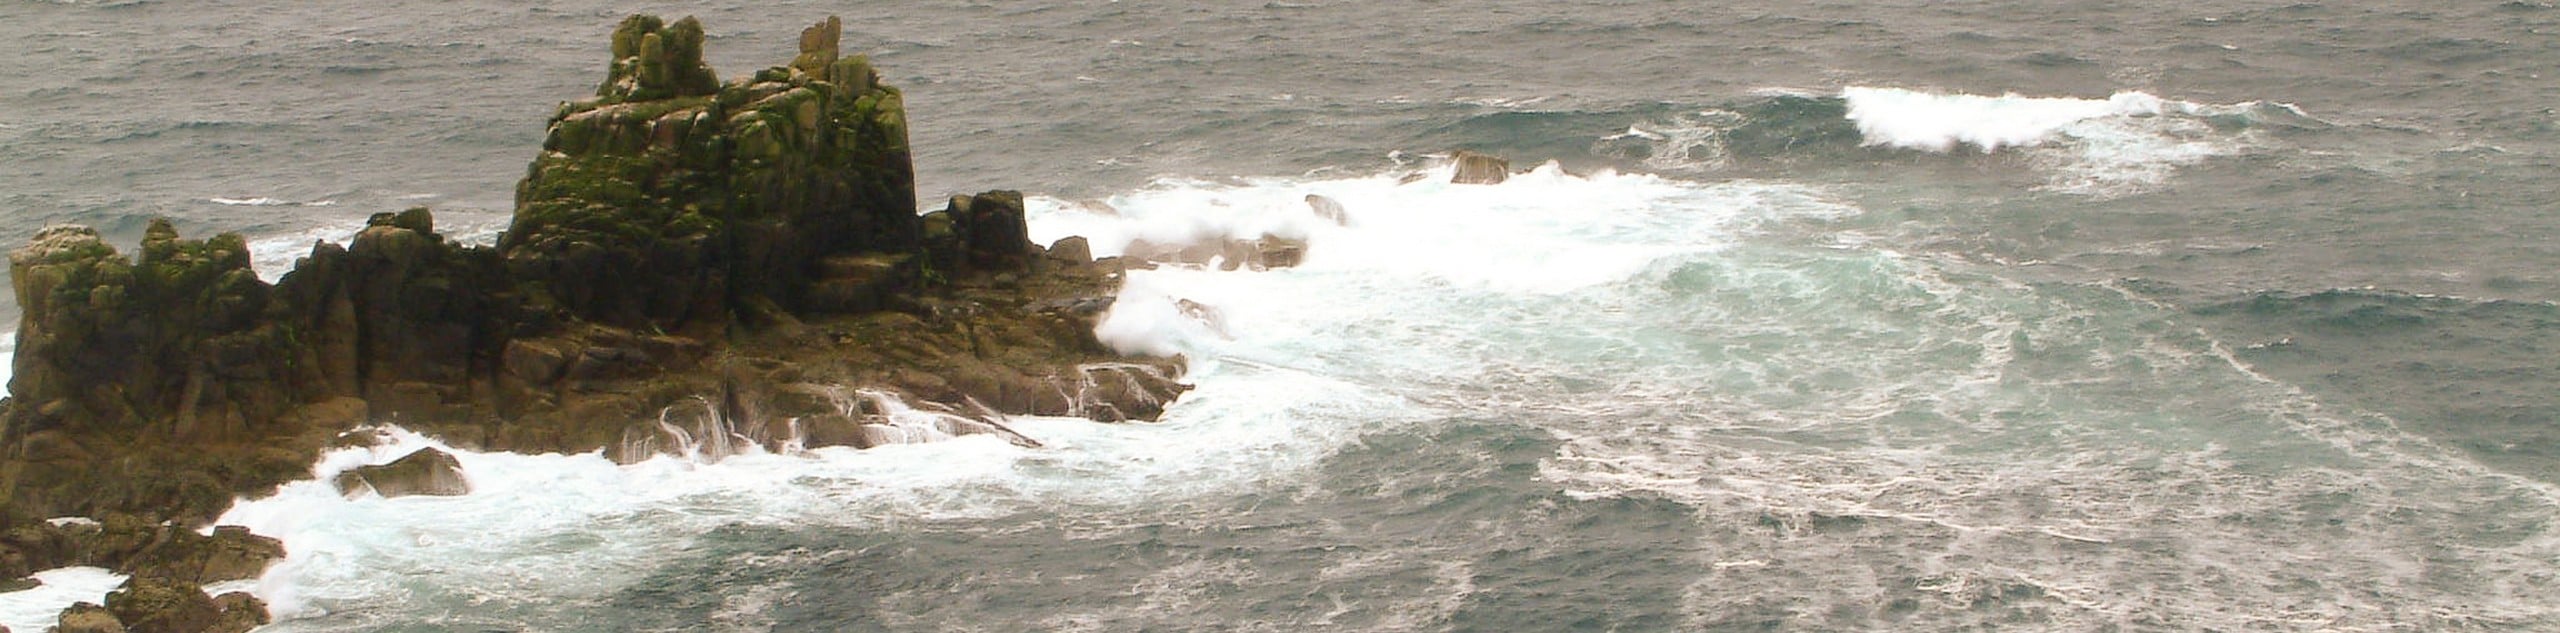 Land’s End to Penzance